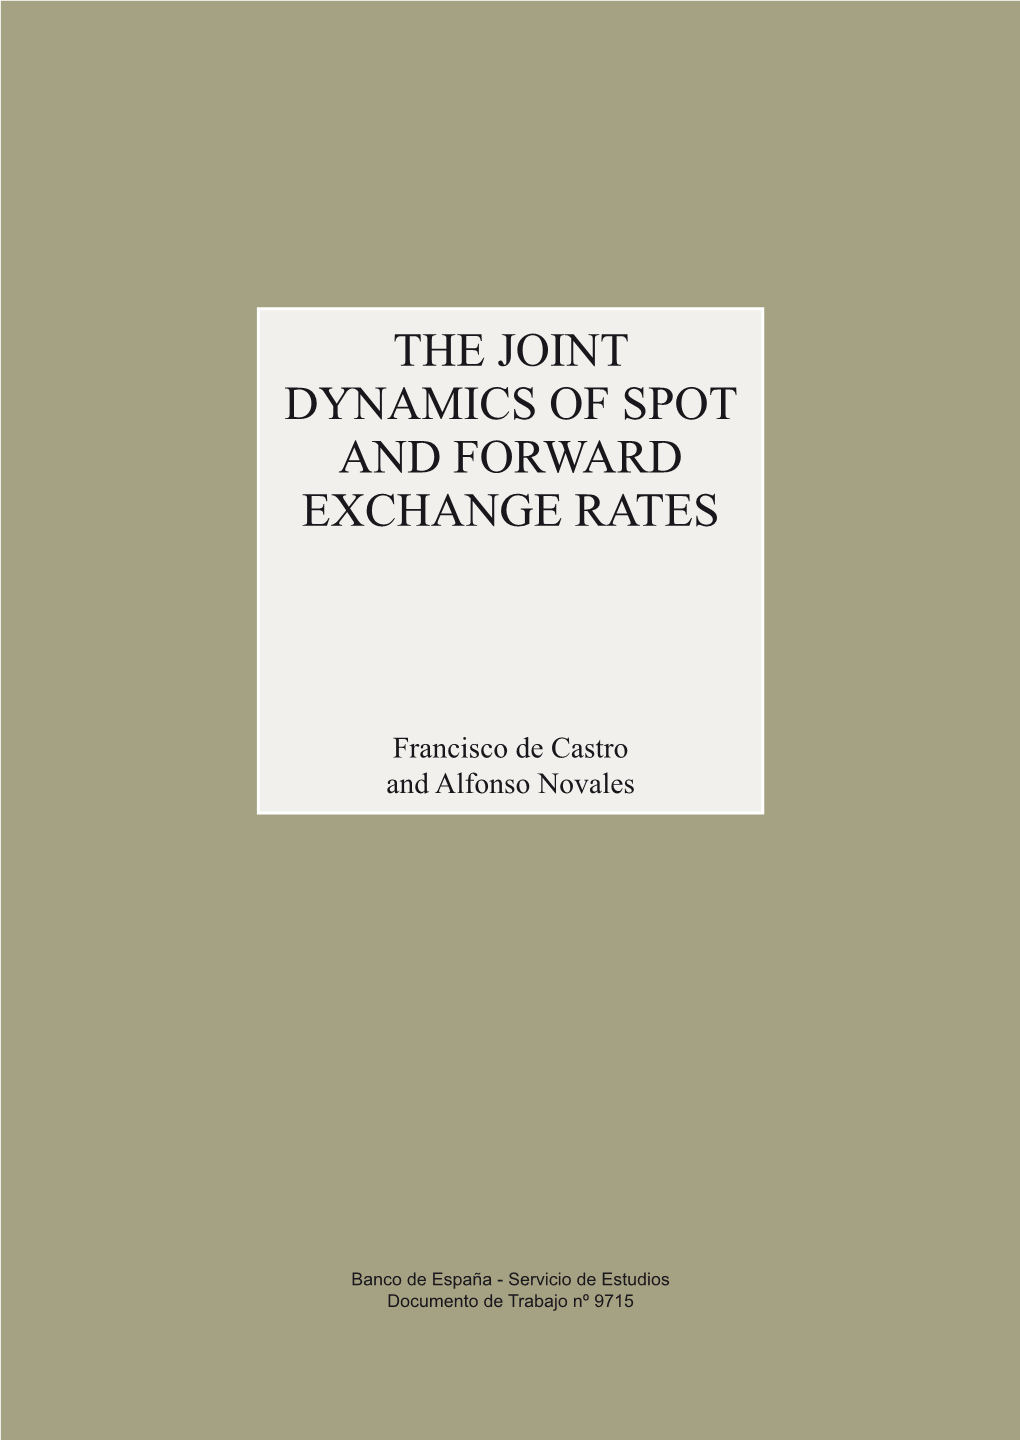 The Joint Dynamics of Spot and Forward Exchange Rates